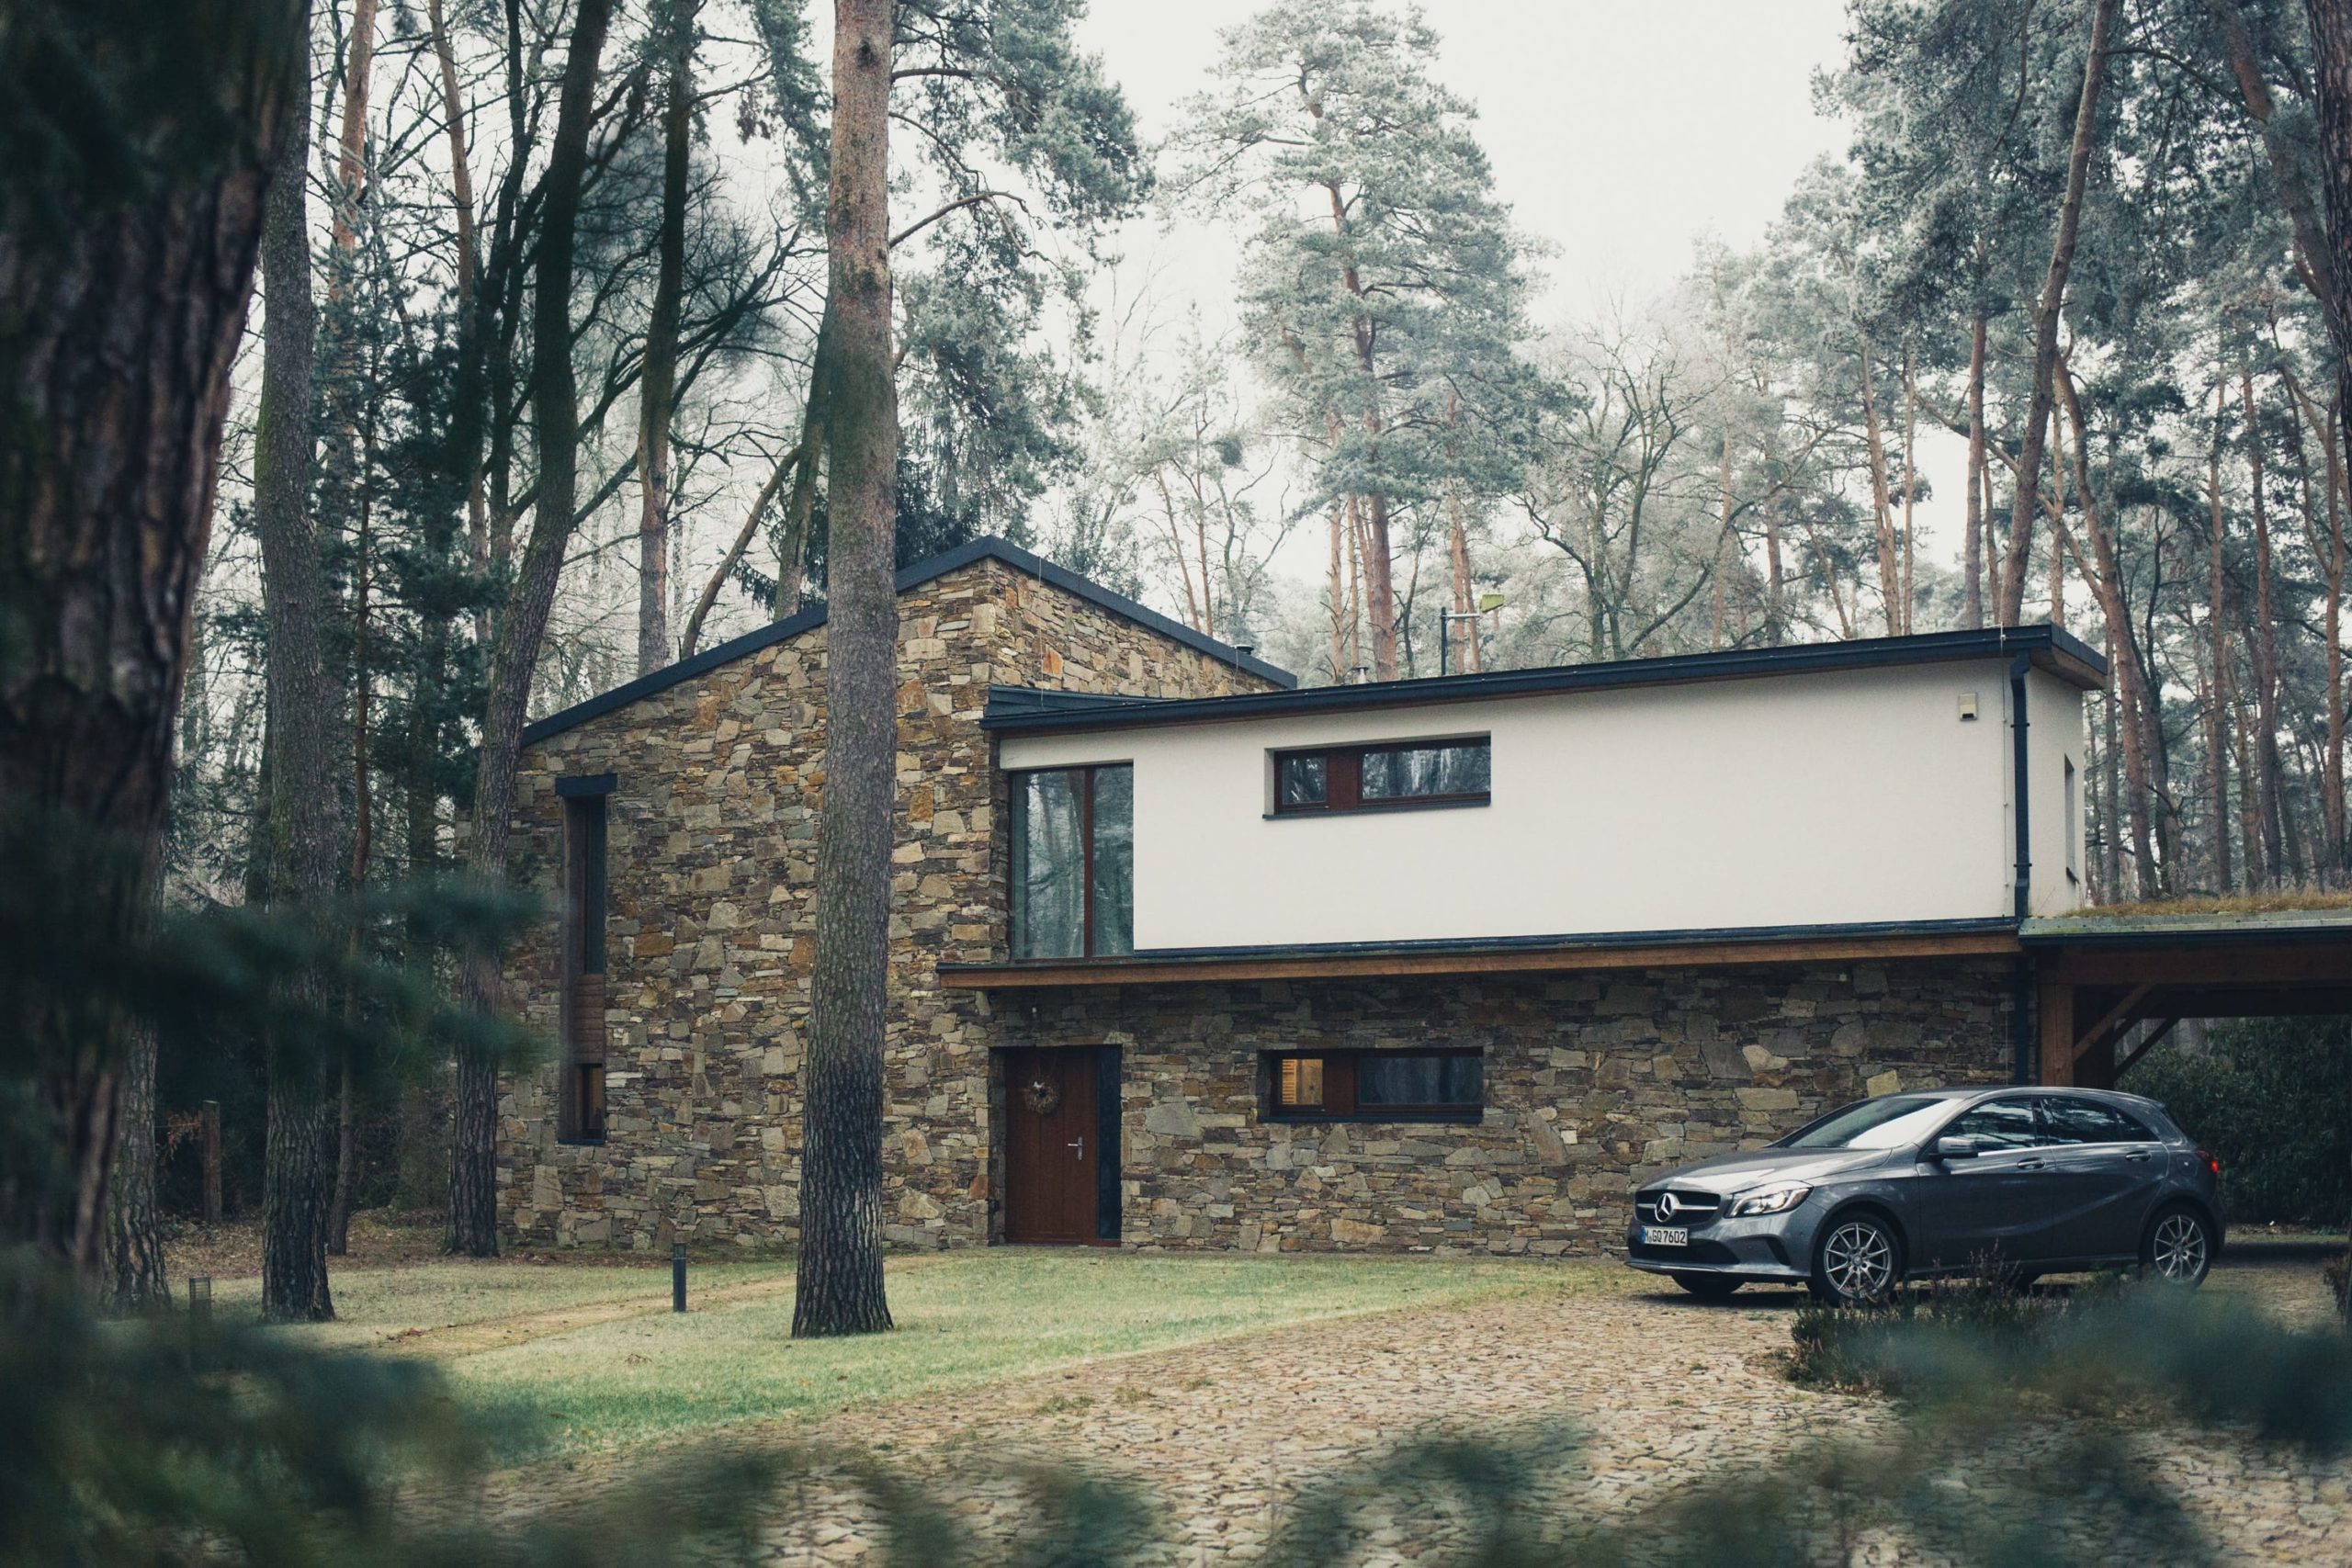 Modern home with car in driveway surrounded by tall trees